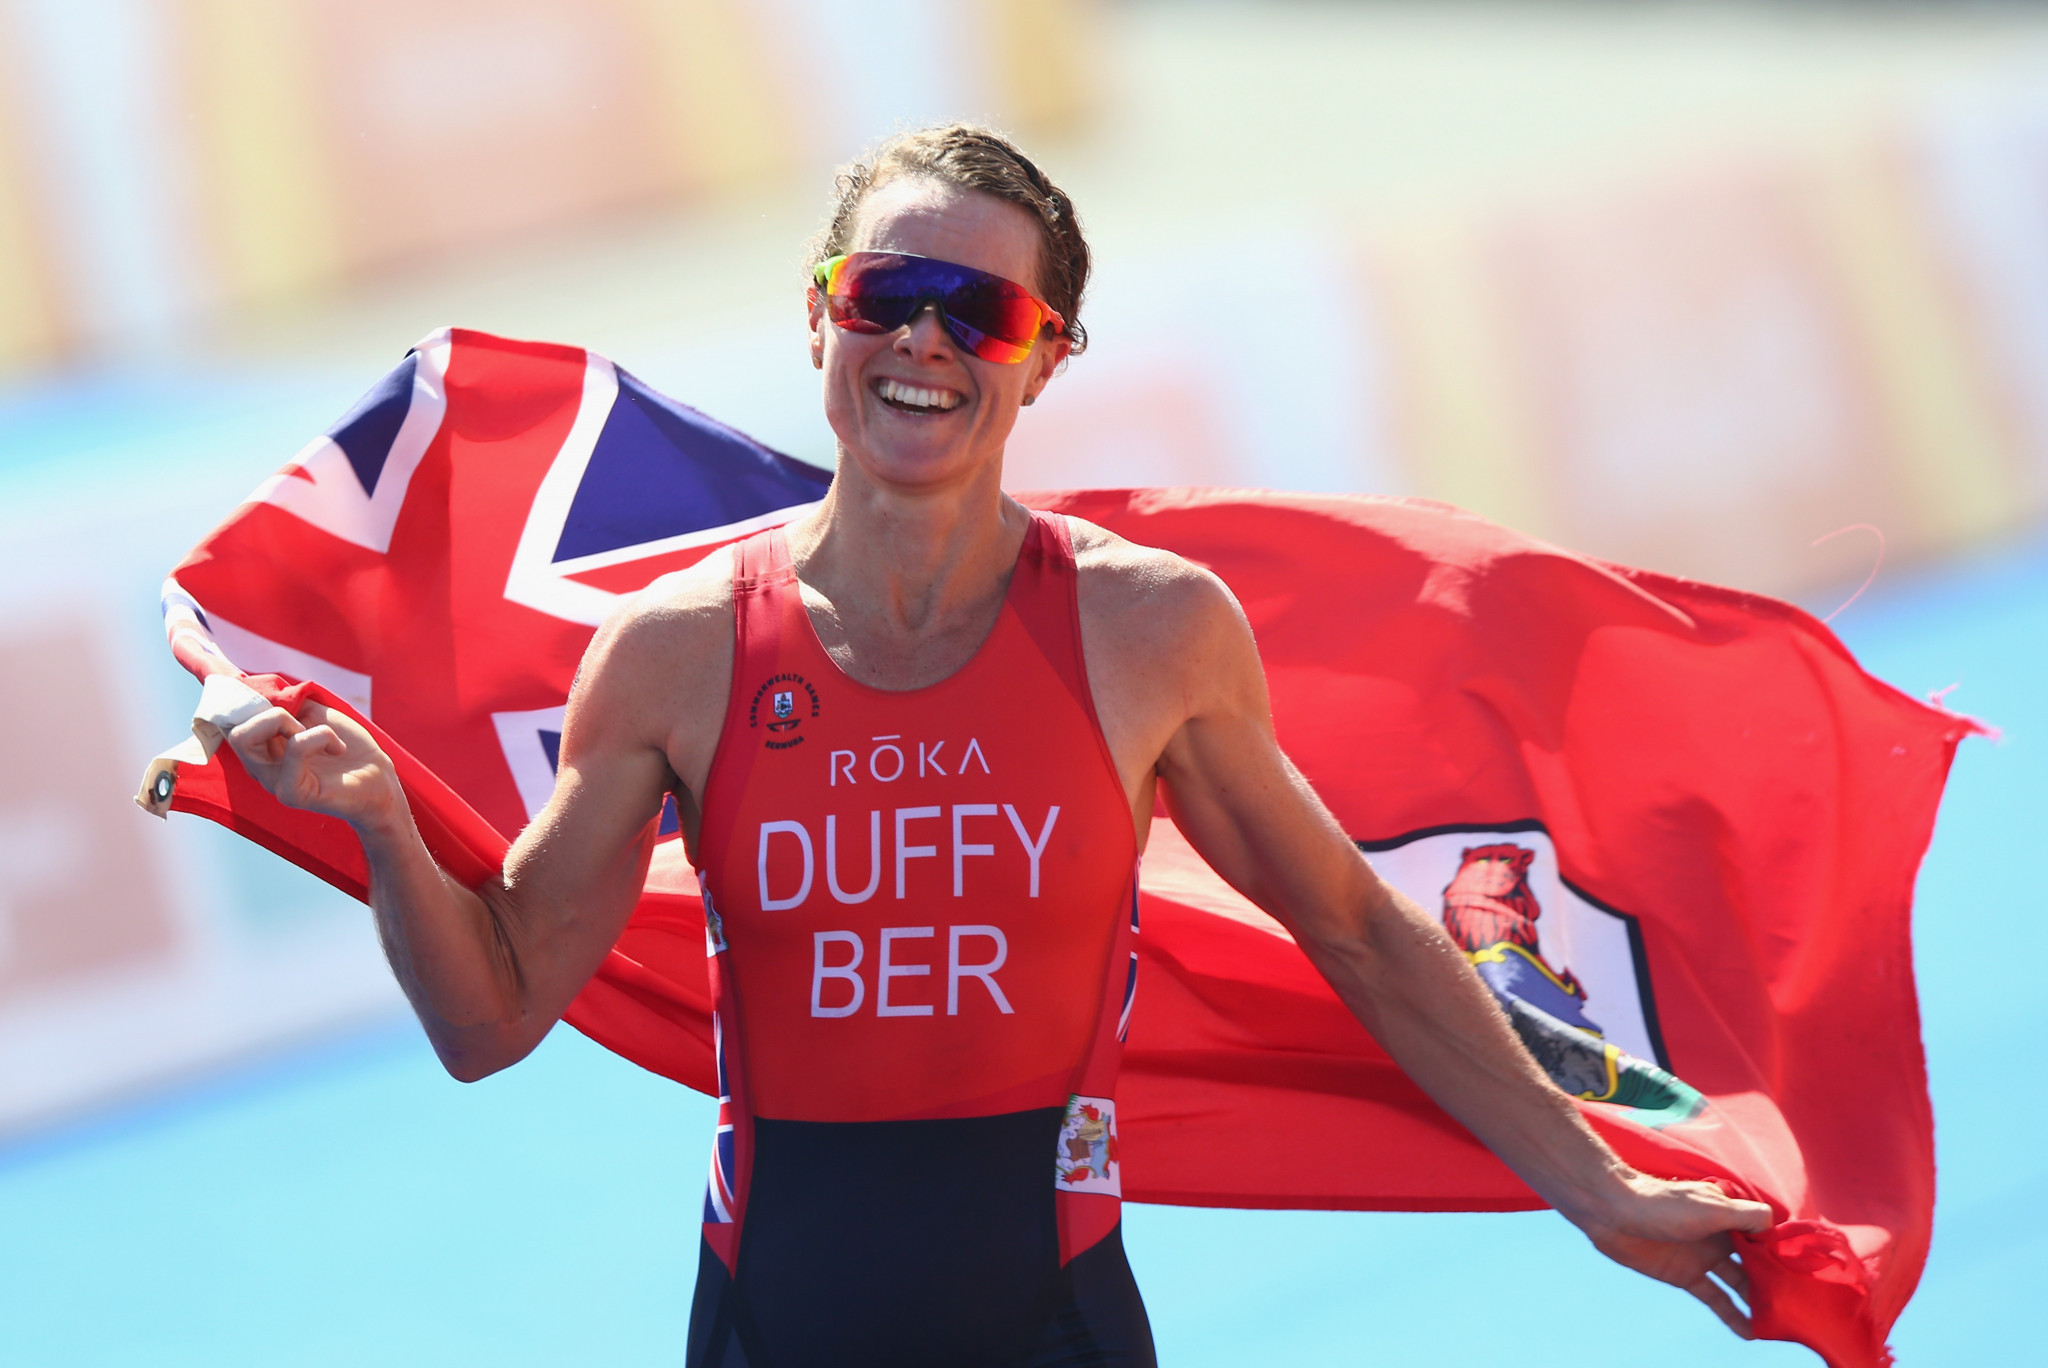 Flora Duffy of Bermuda celebrates on her way to winning gold during the Women's Triathlon on day one of the Gold Coast 2018 Commonwealth Games ©Getty Images